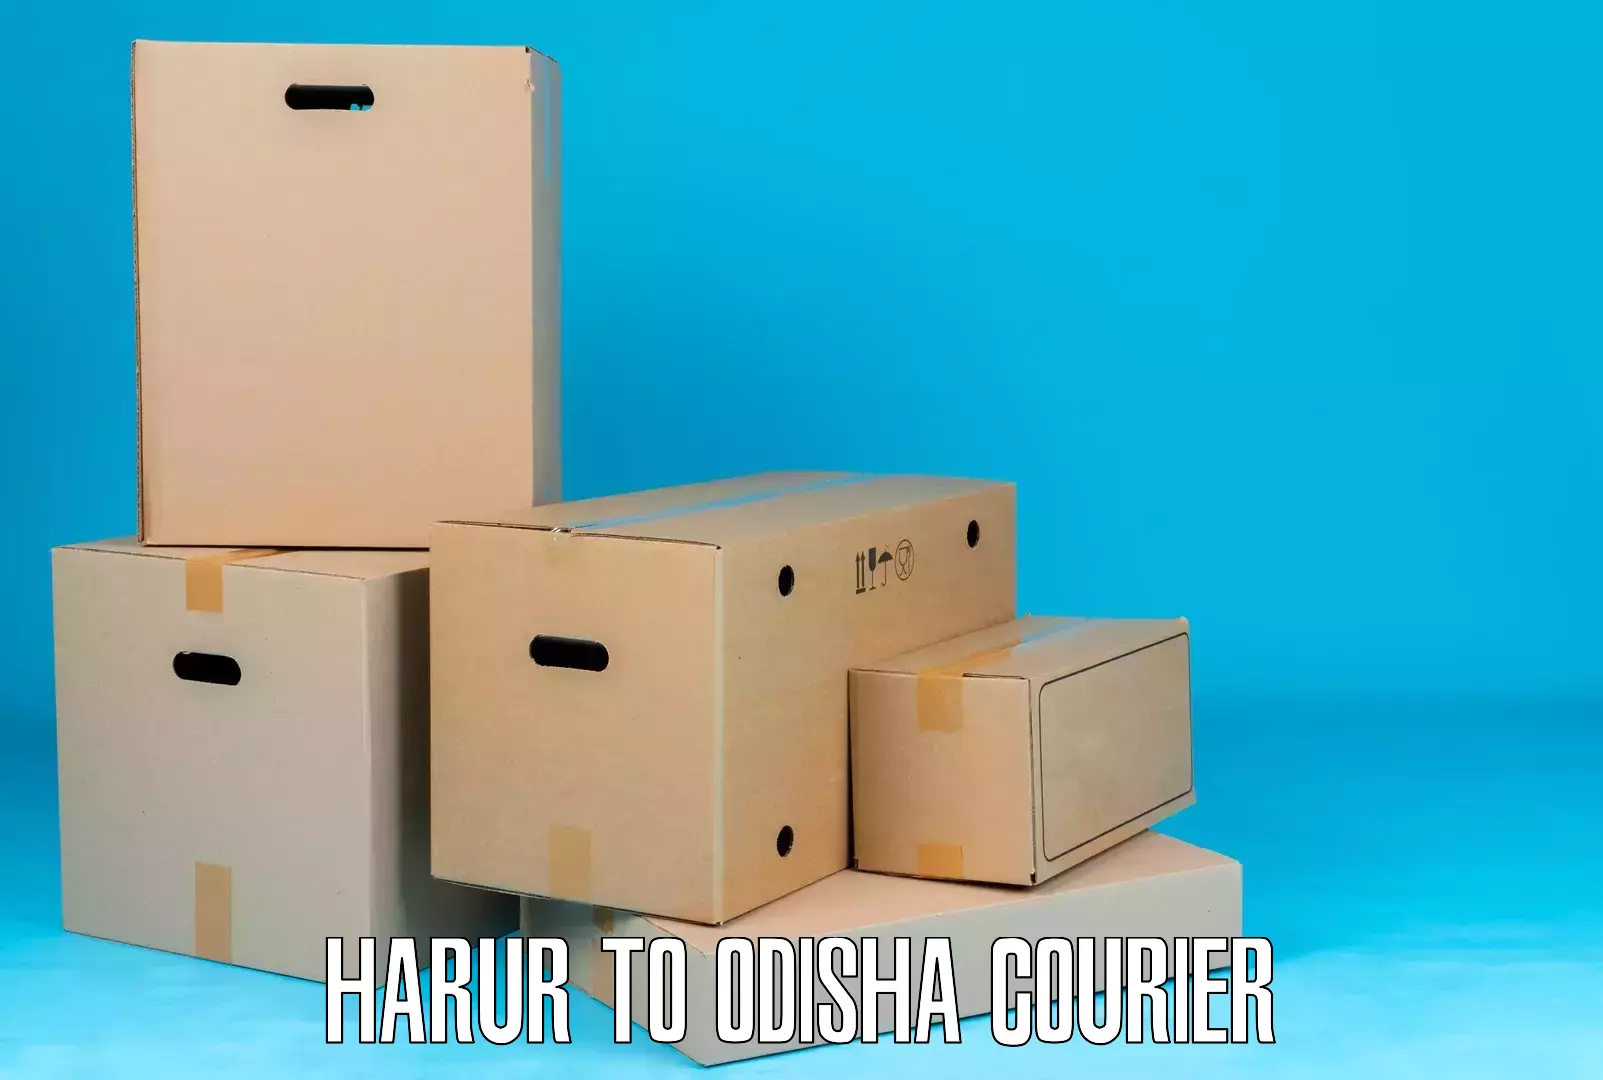 State-of-the-art courier technology in Harur to Sonepur